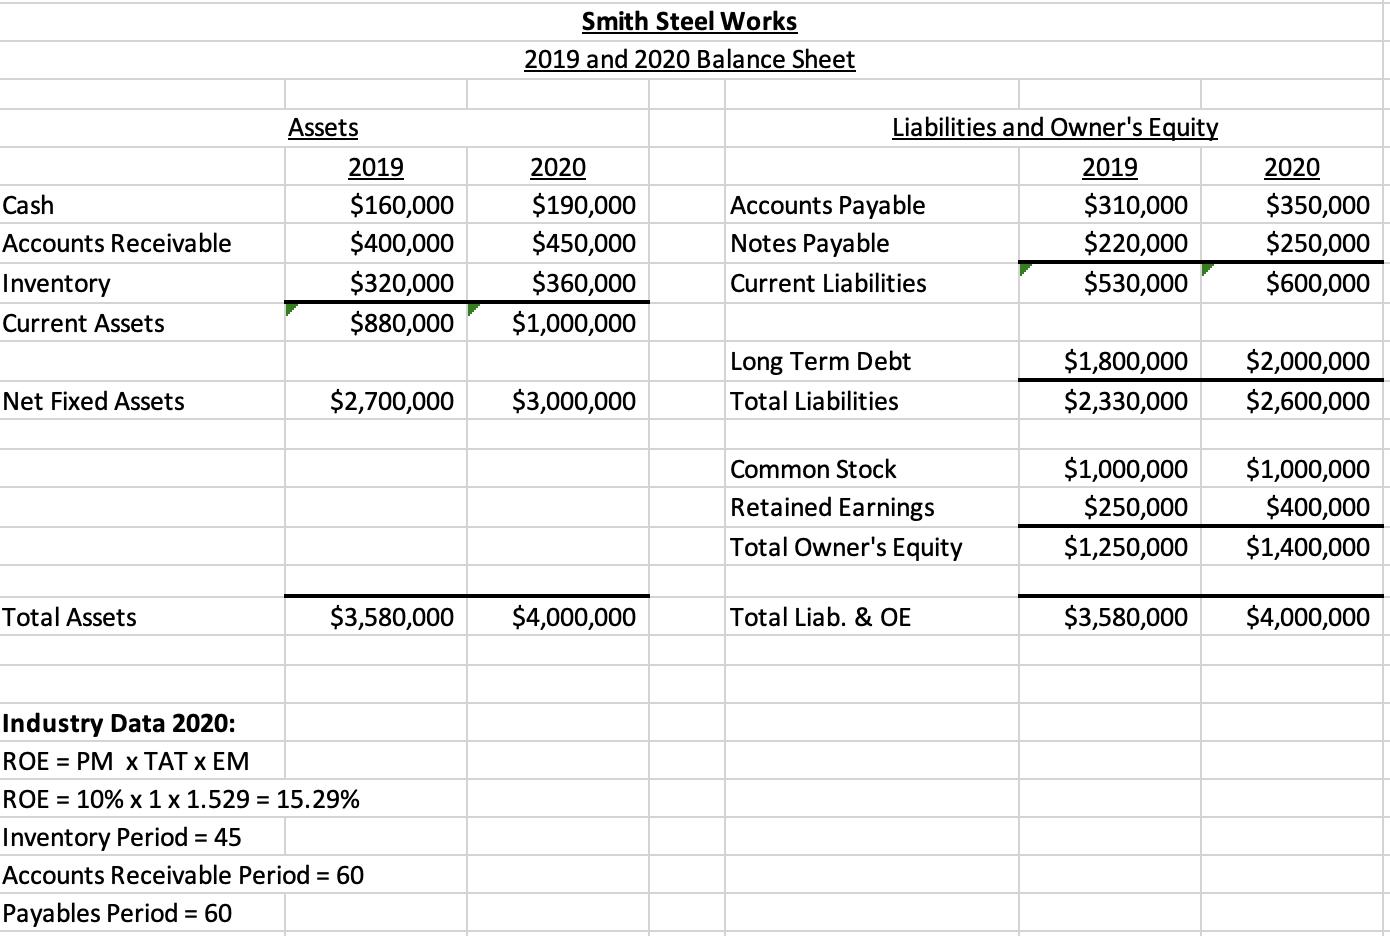 Smith Steel Works 2019 and 2020 Balance Sheet Cash Accounts Receivable Assets 2019 $160,000 $400,000 $320,000 $880,000 2020 $